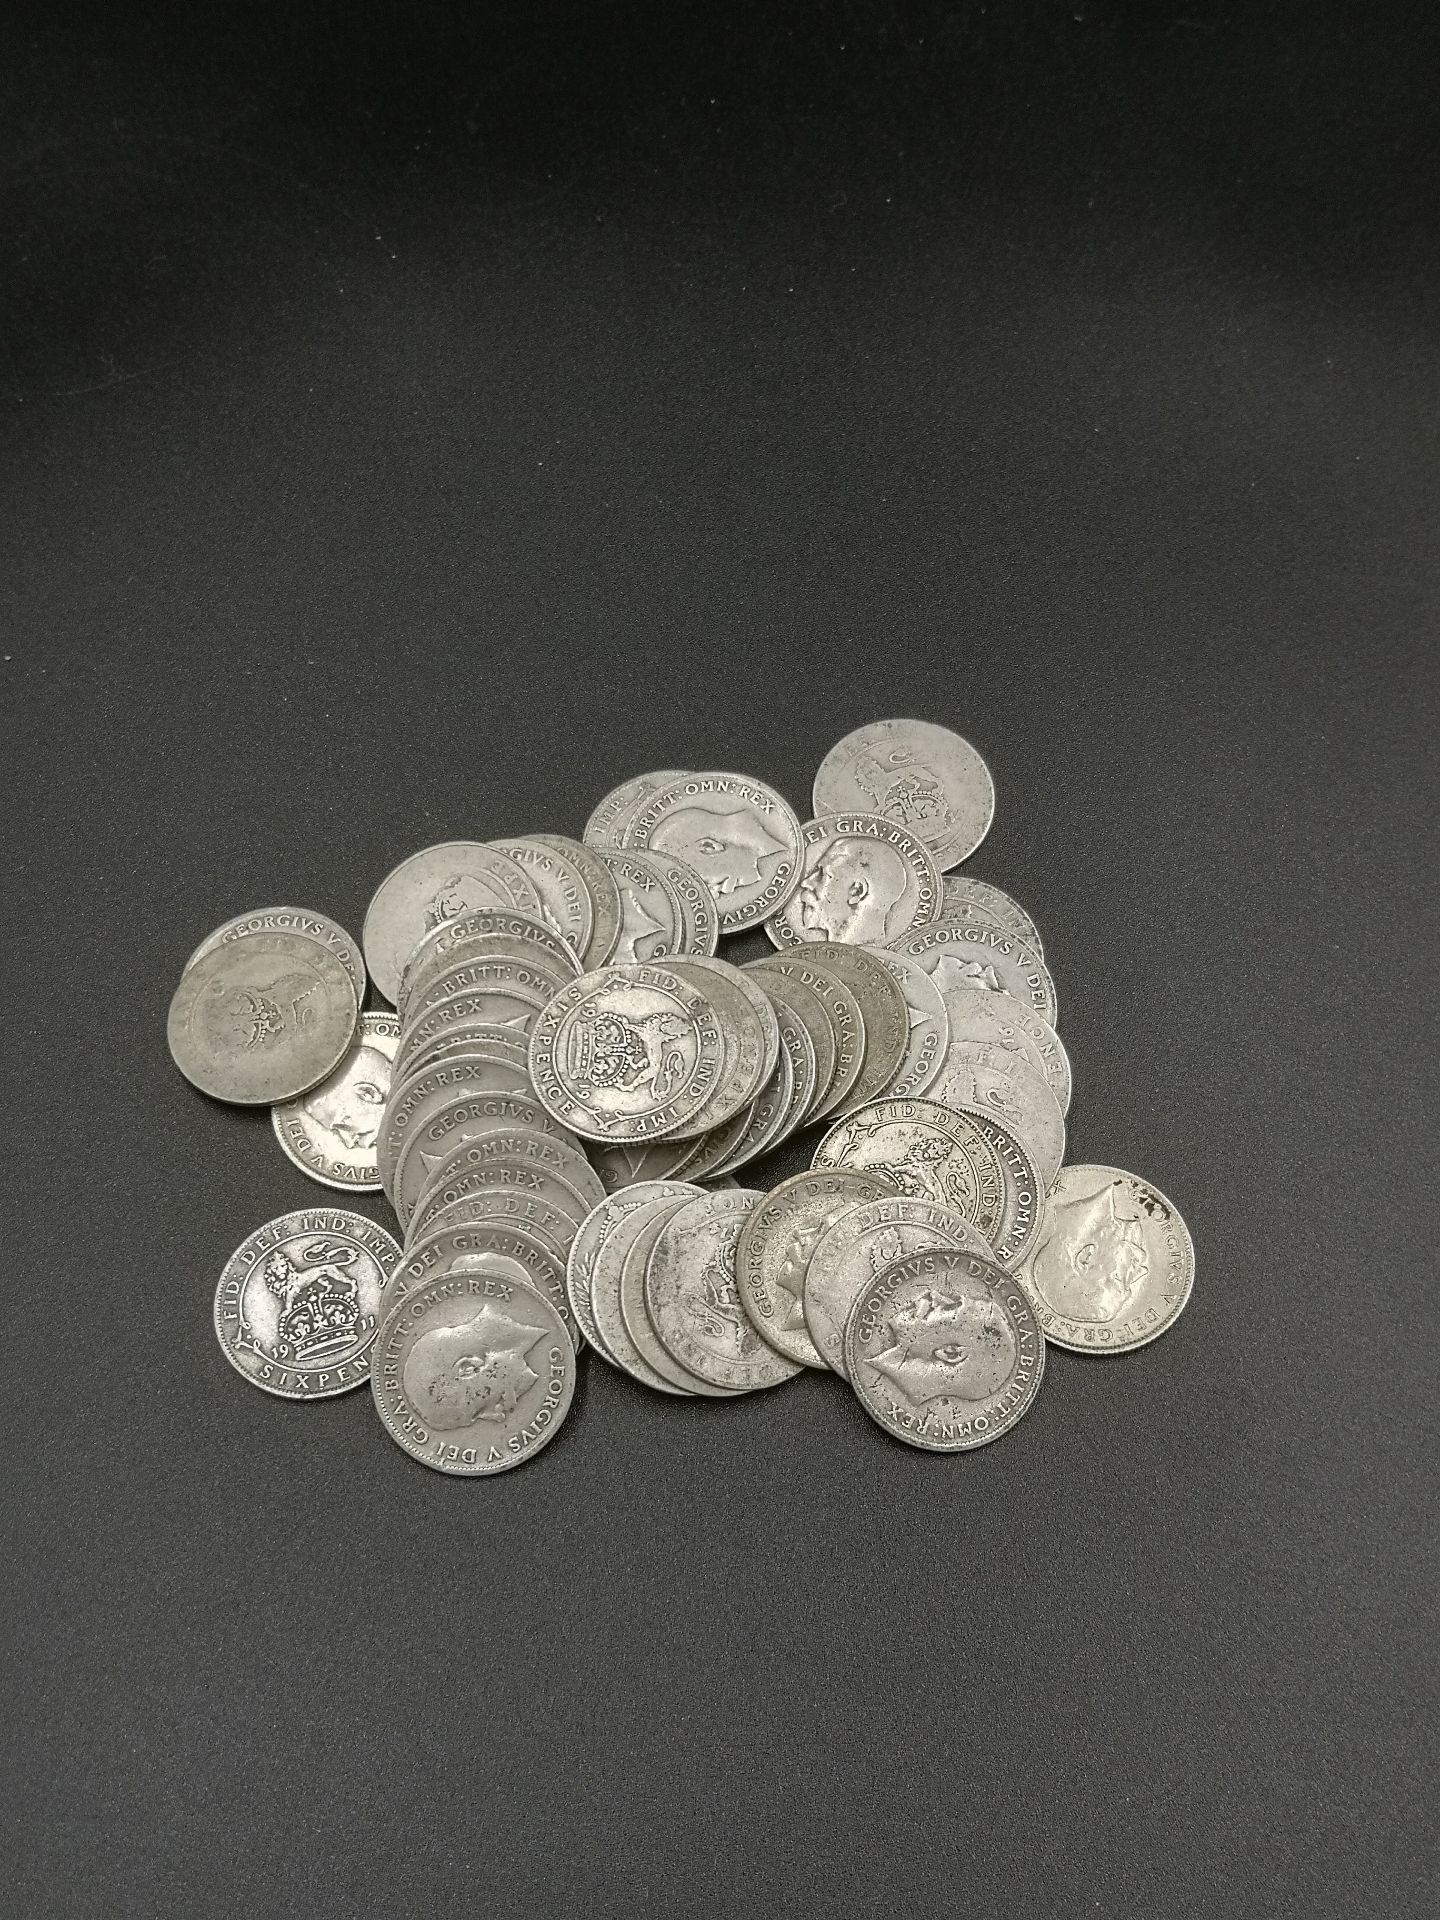 Quantity of pre-1920 silver sixpence coins